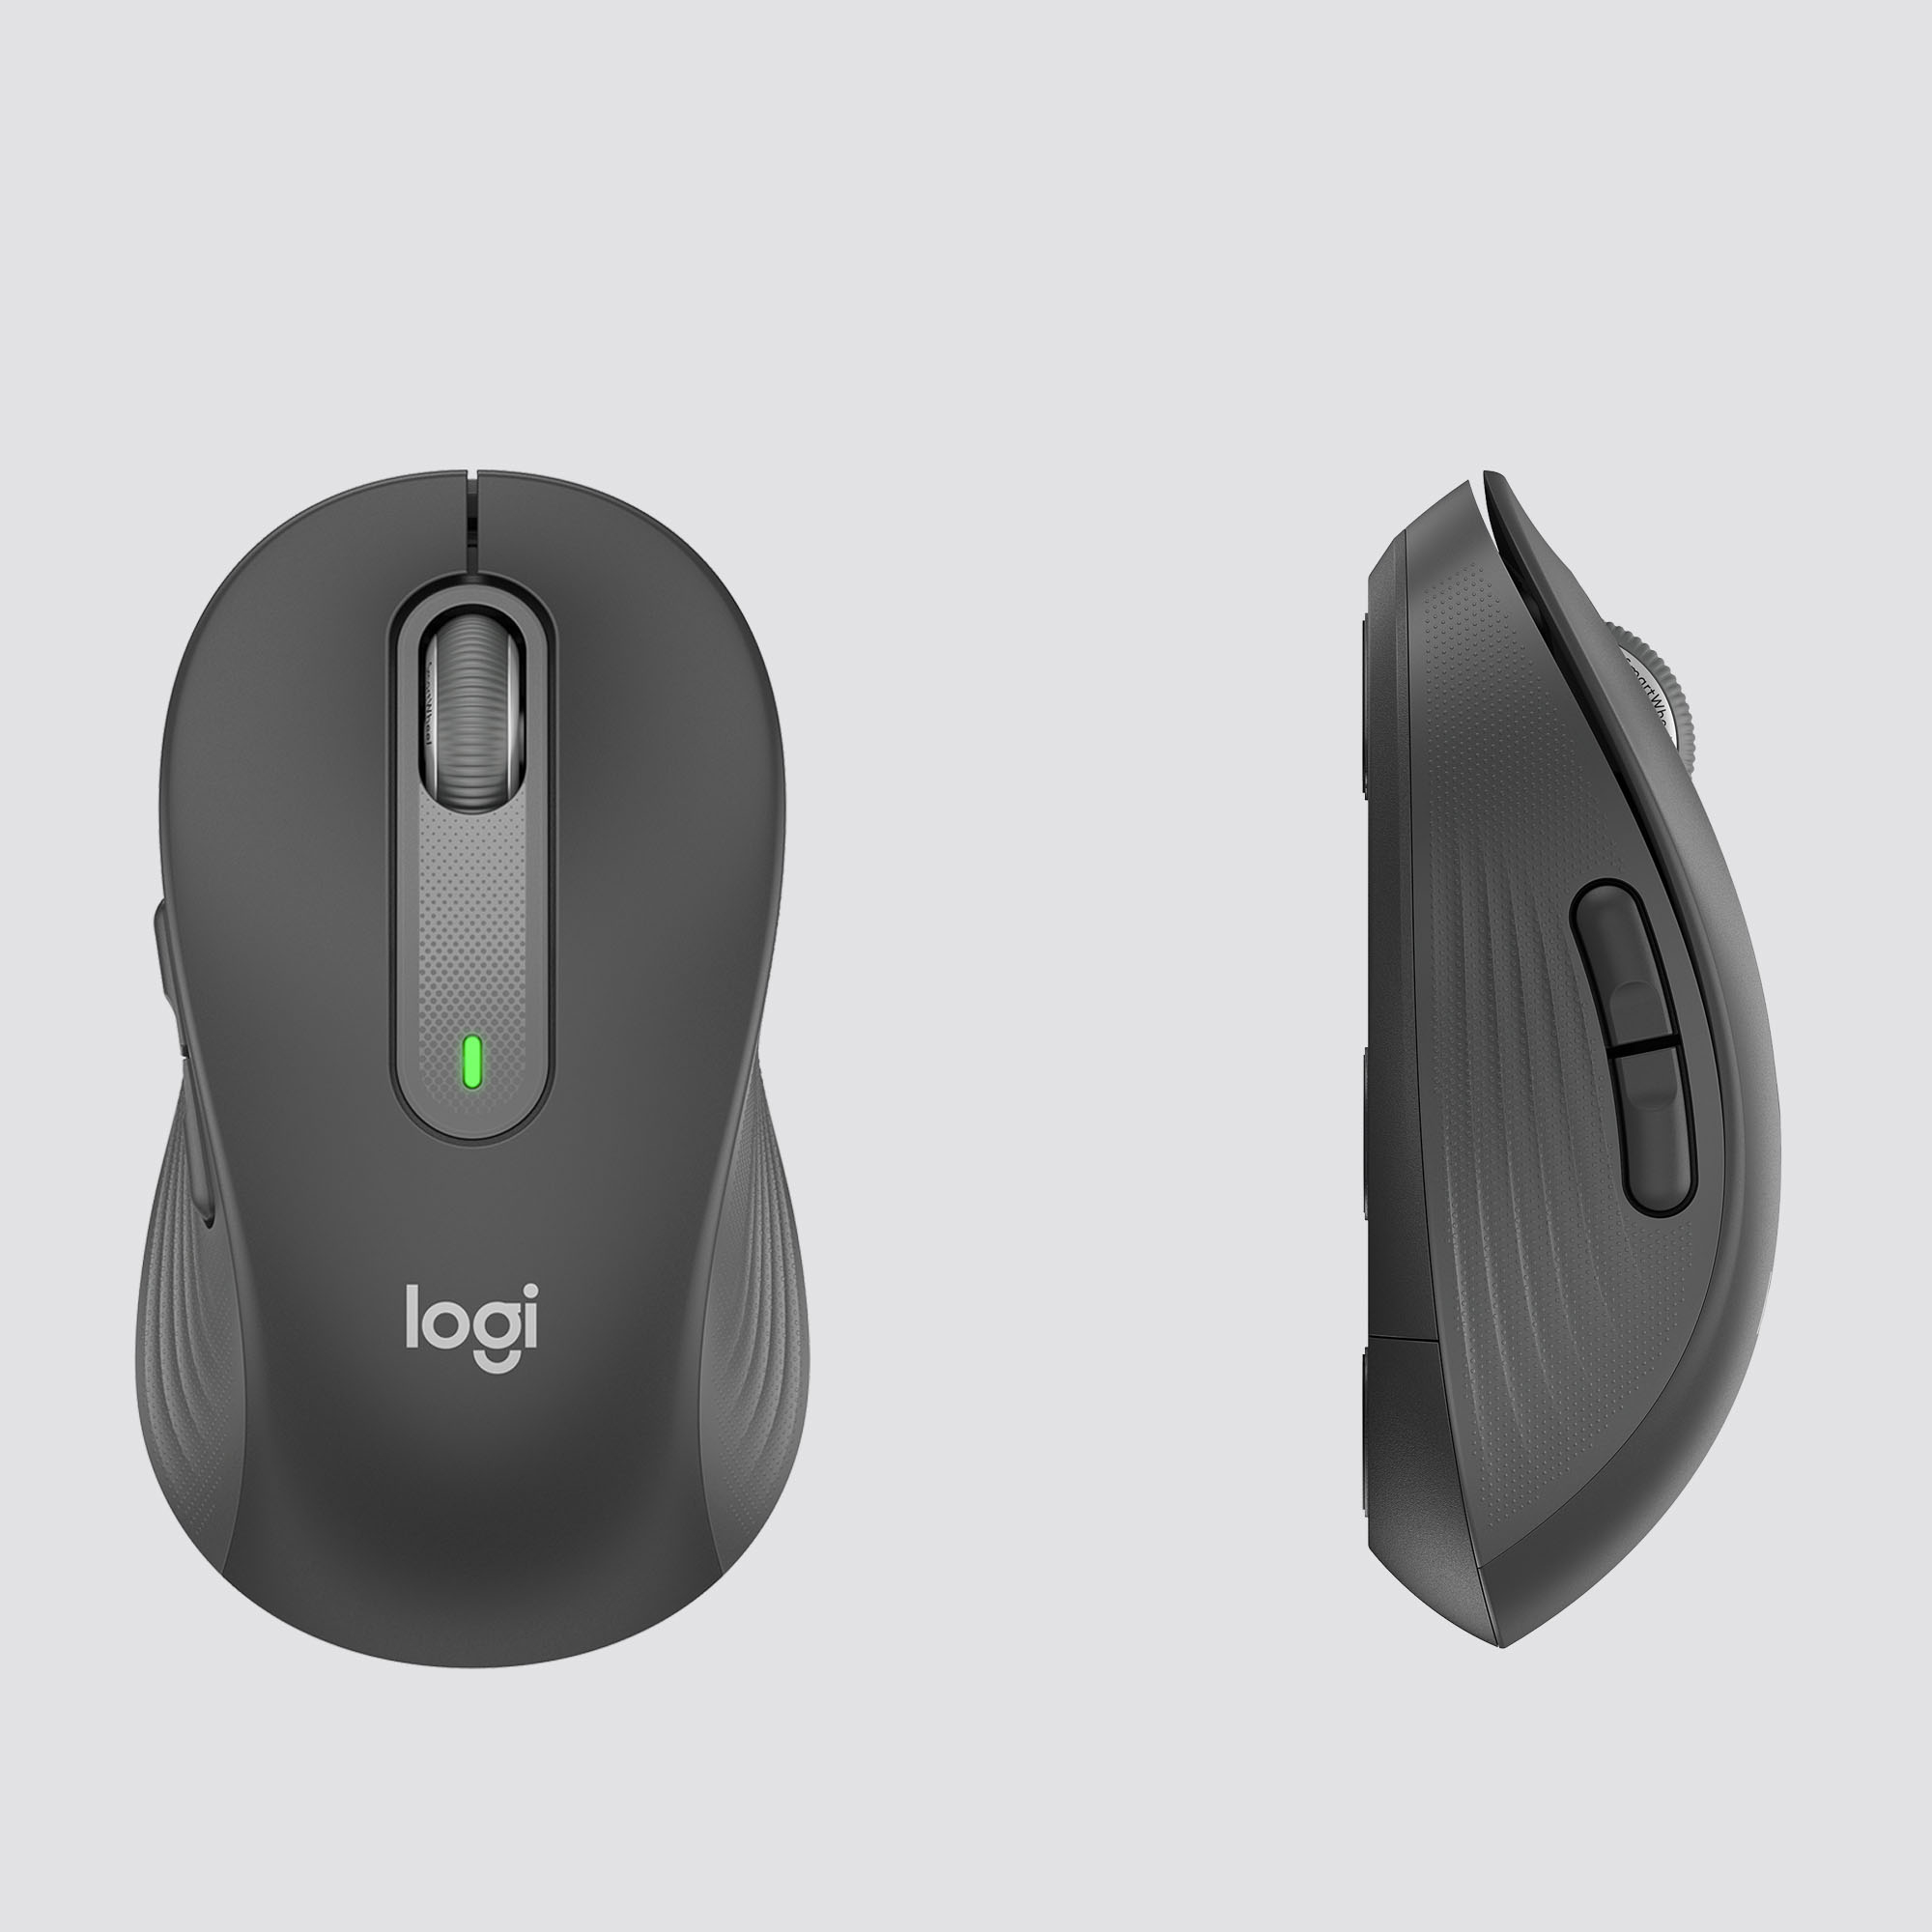 Logitech Signature M650 L Full-size Mouse Clicks - Best 910-006231 Scroll Graphite Silent with Buy Wireless